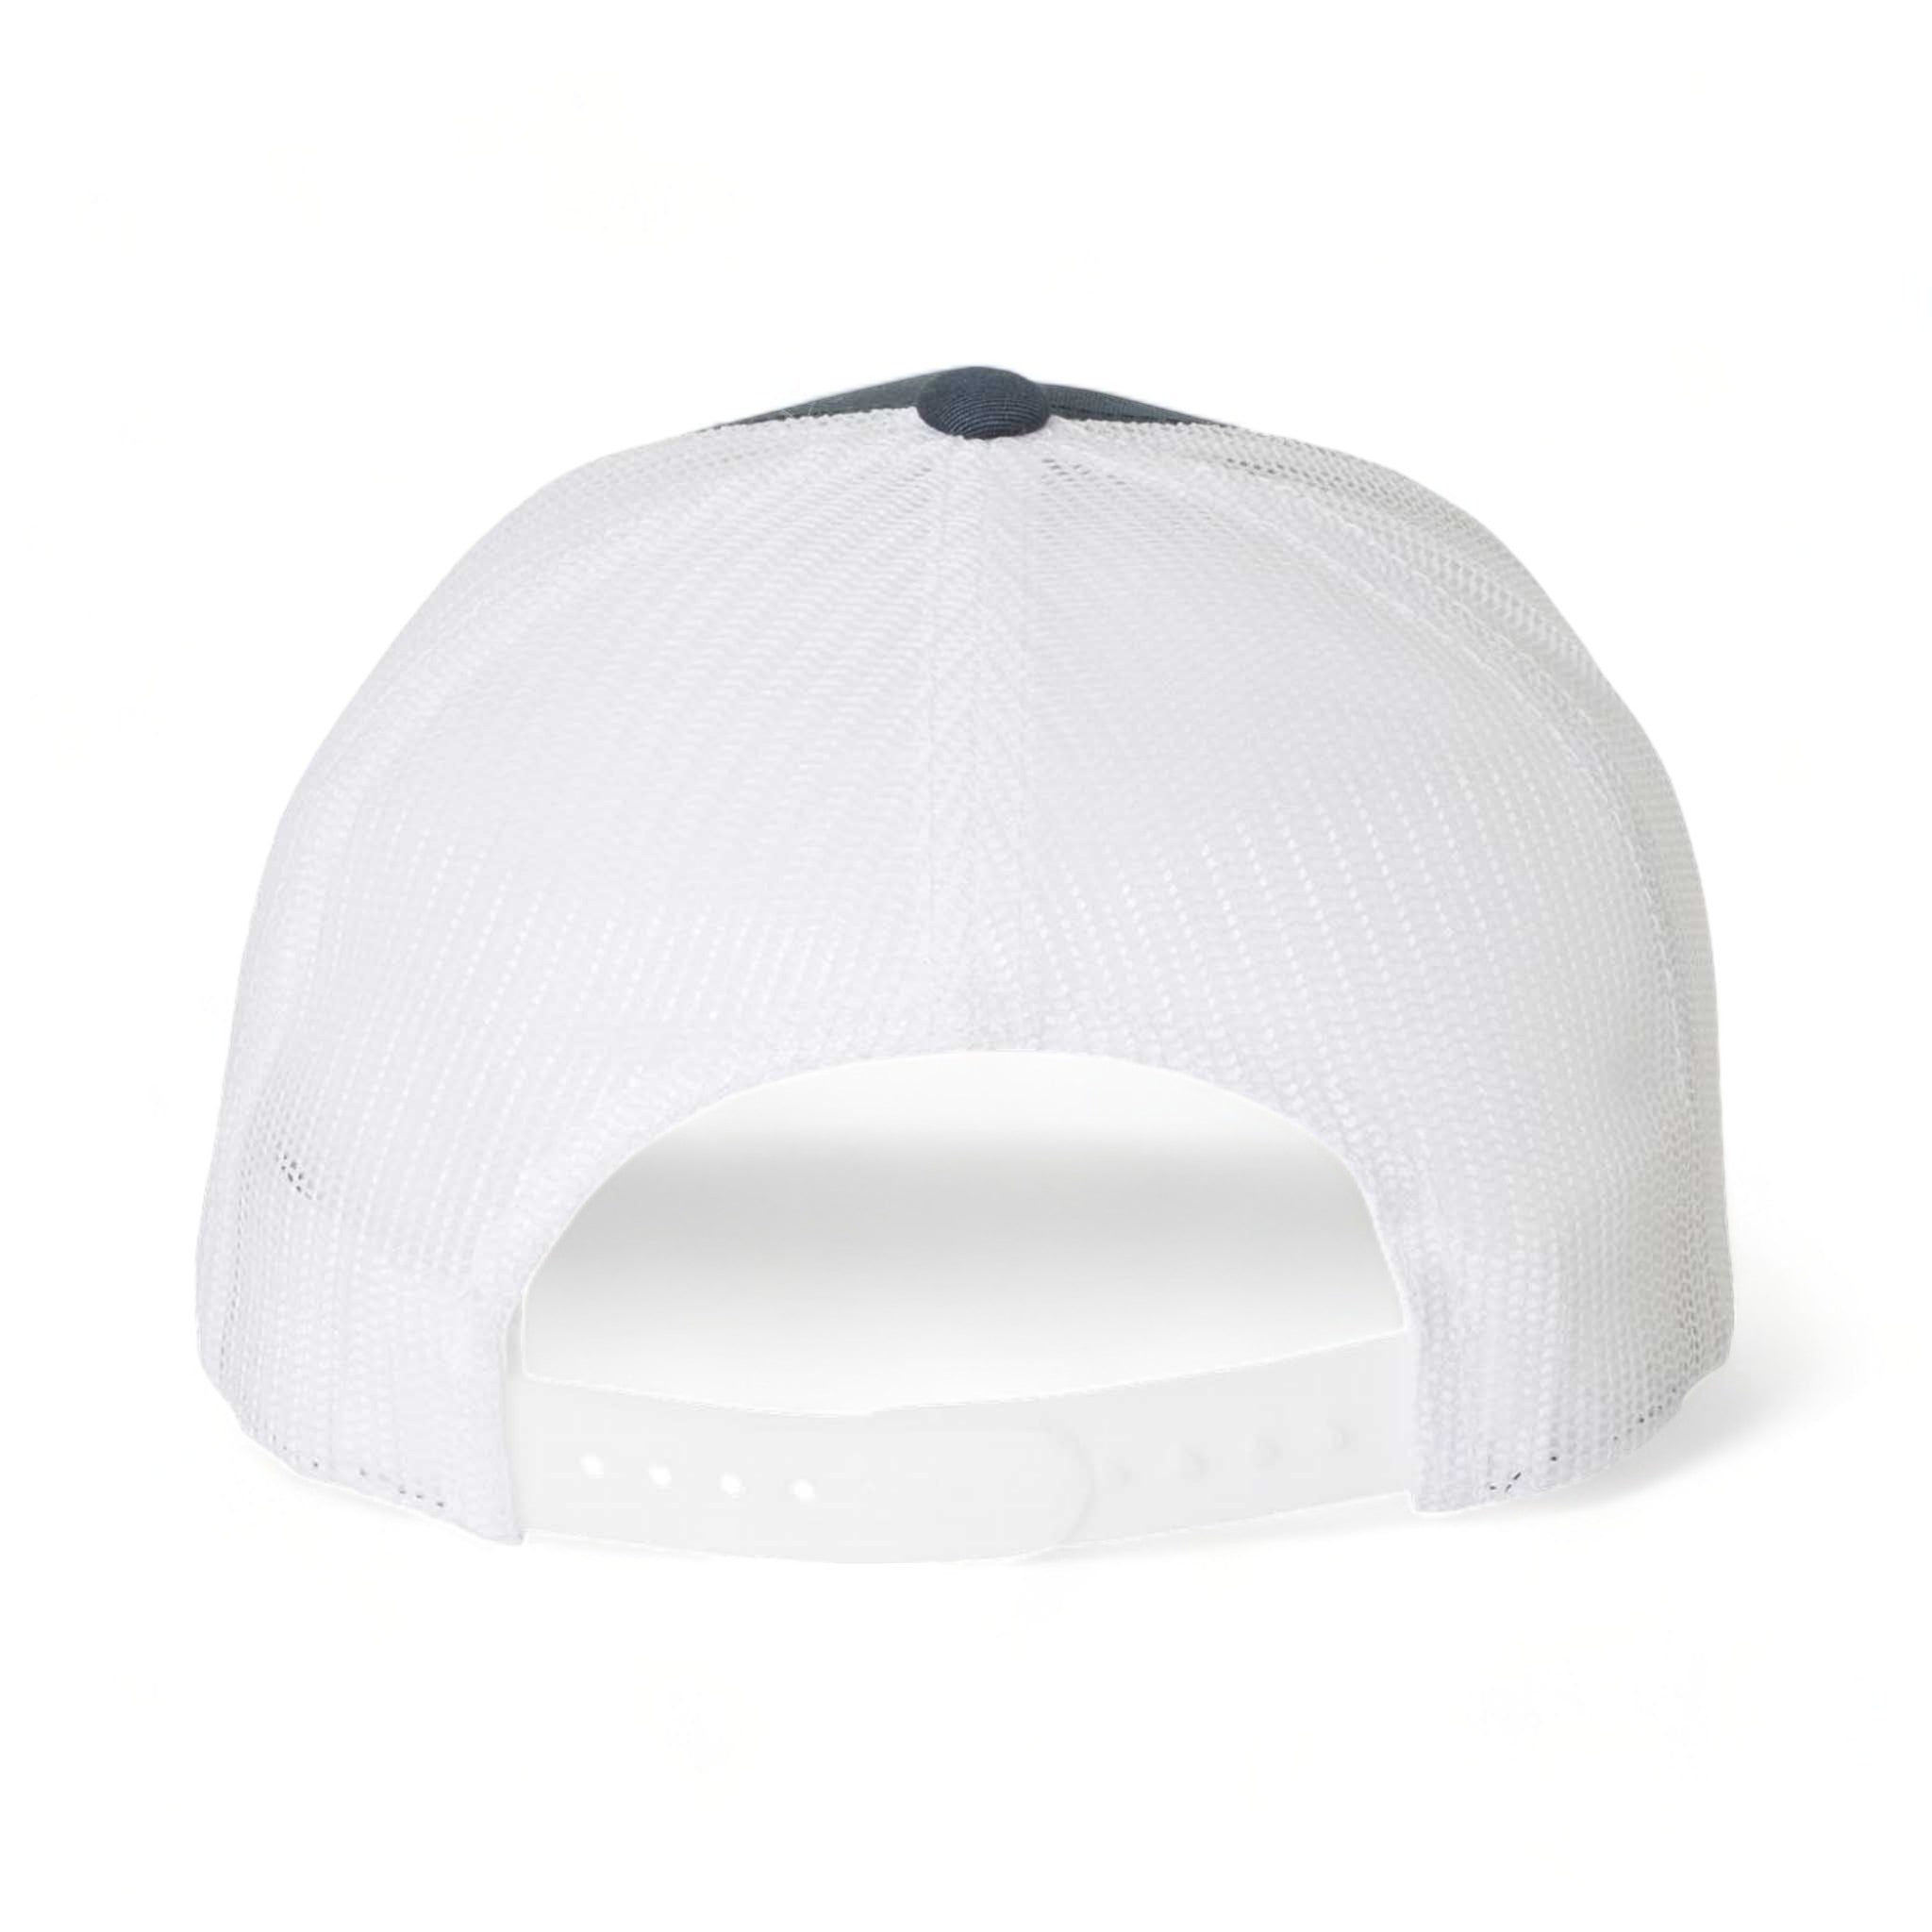 Back view of YP Classics 6506 custom hat in navy and white